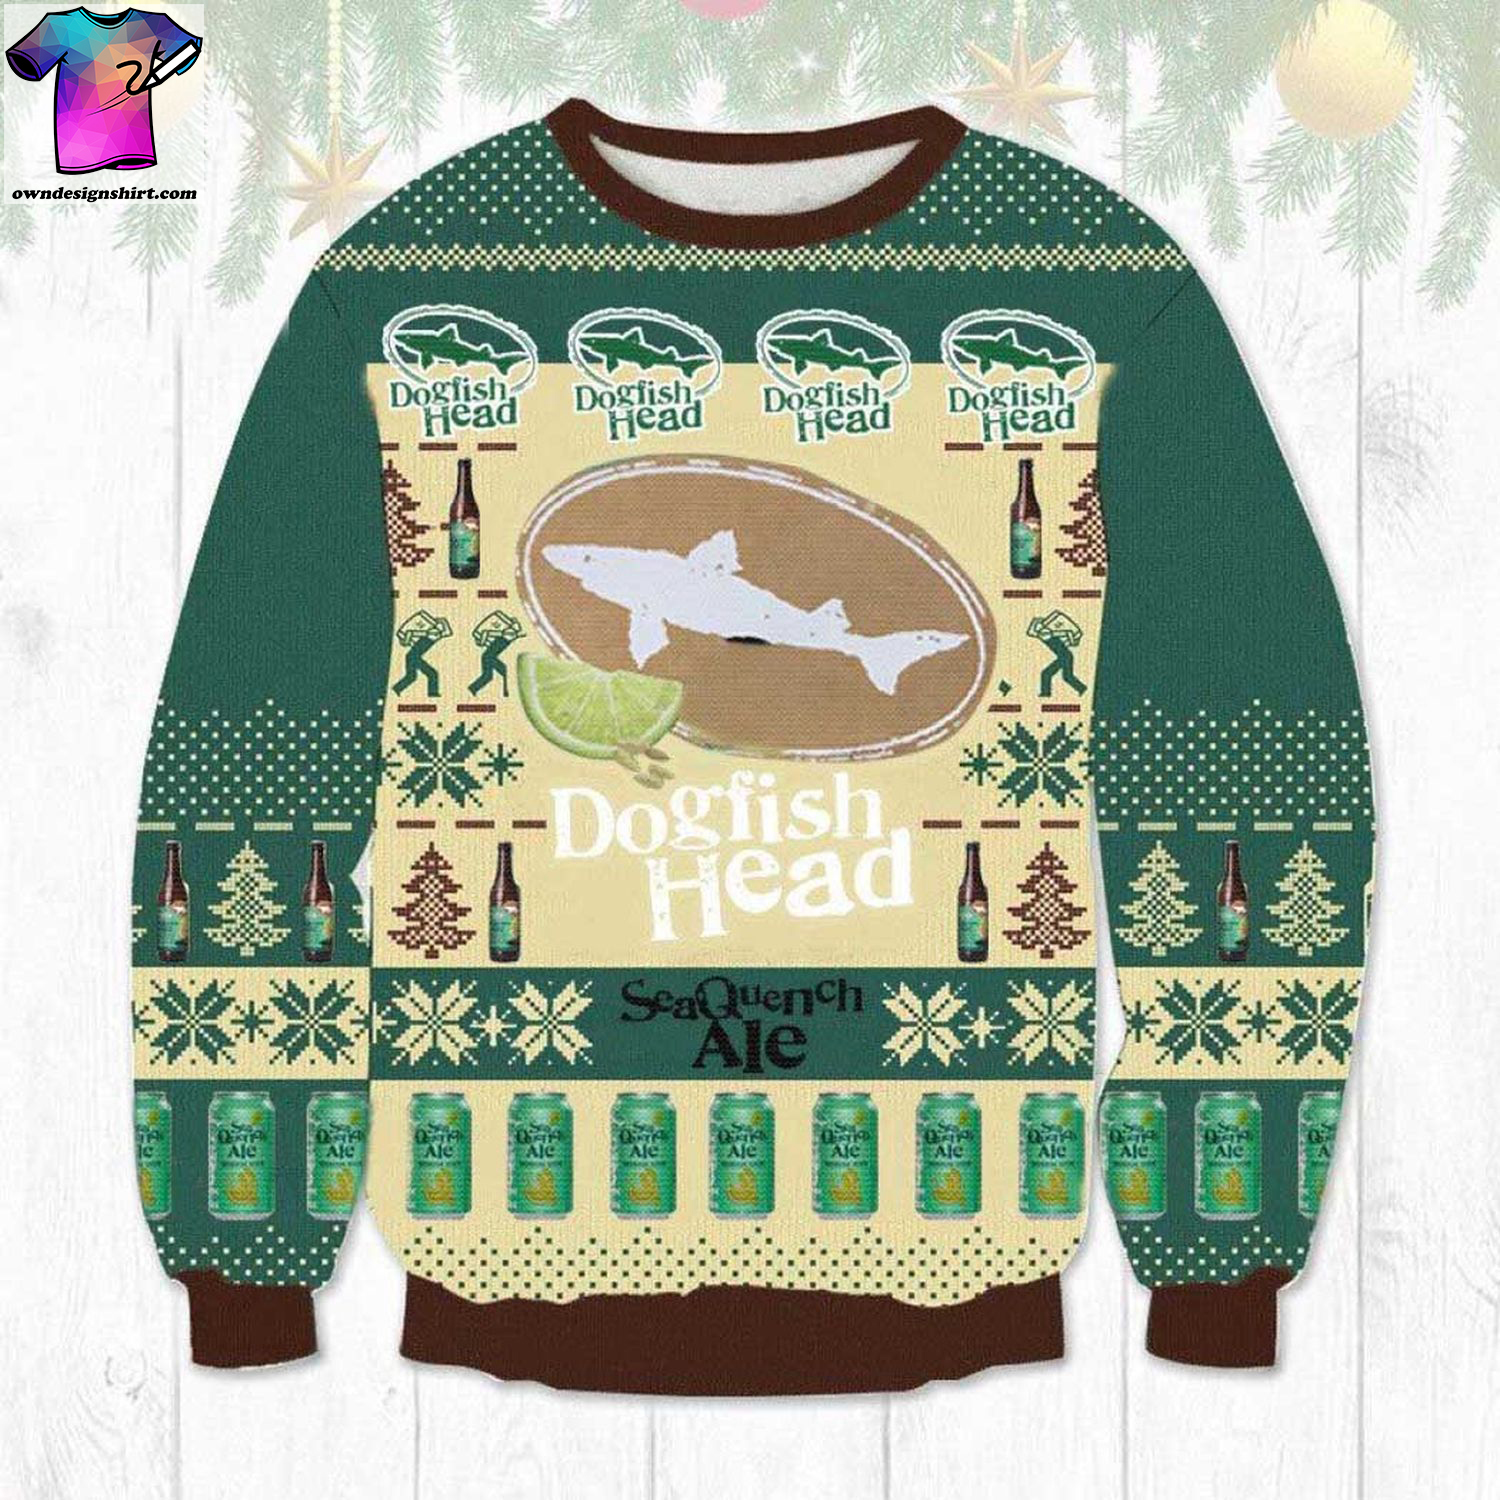 Dogfish head seaquench ale ugly christmas sweater